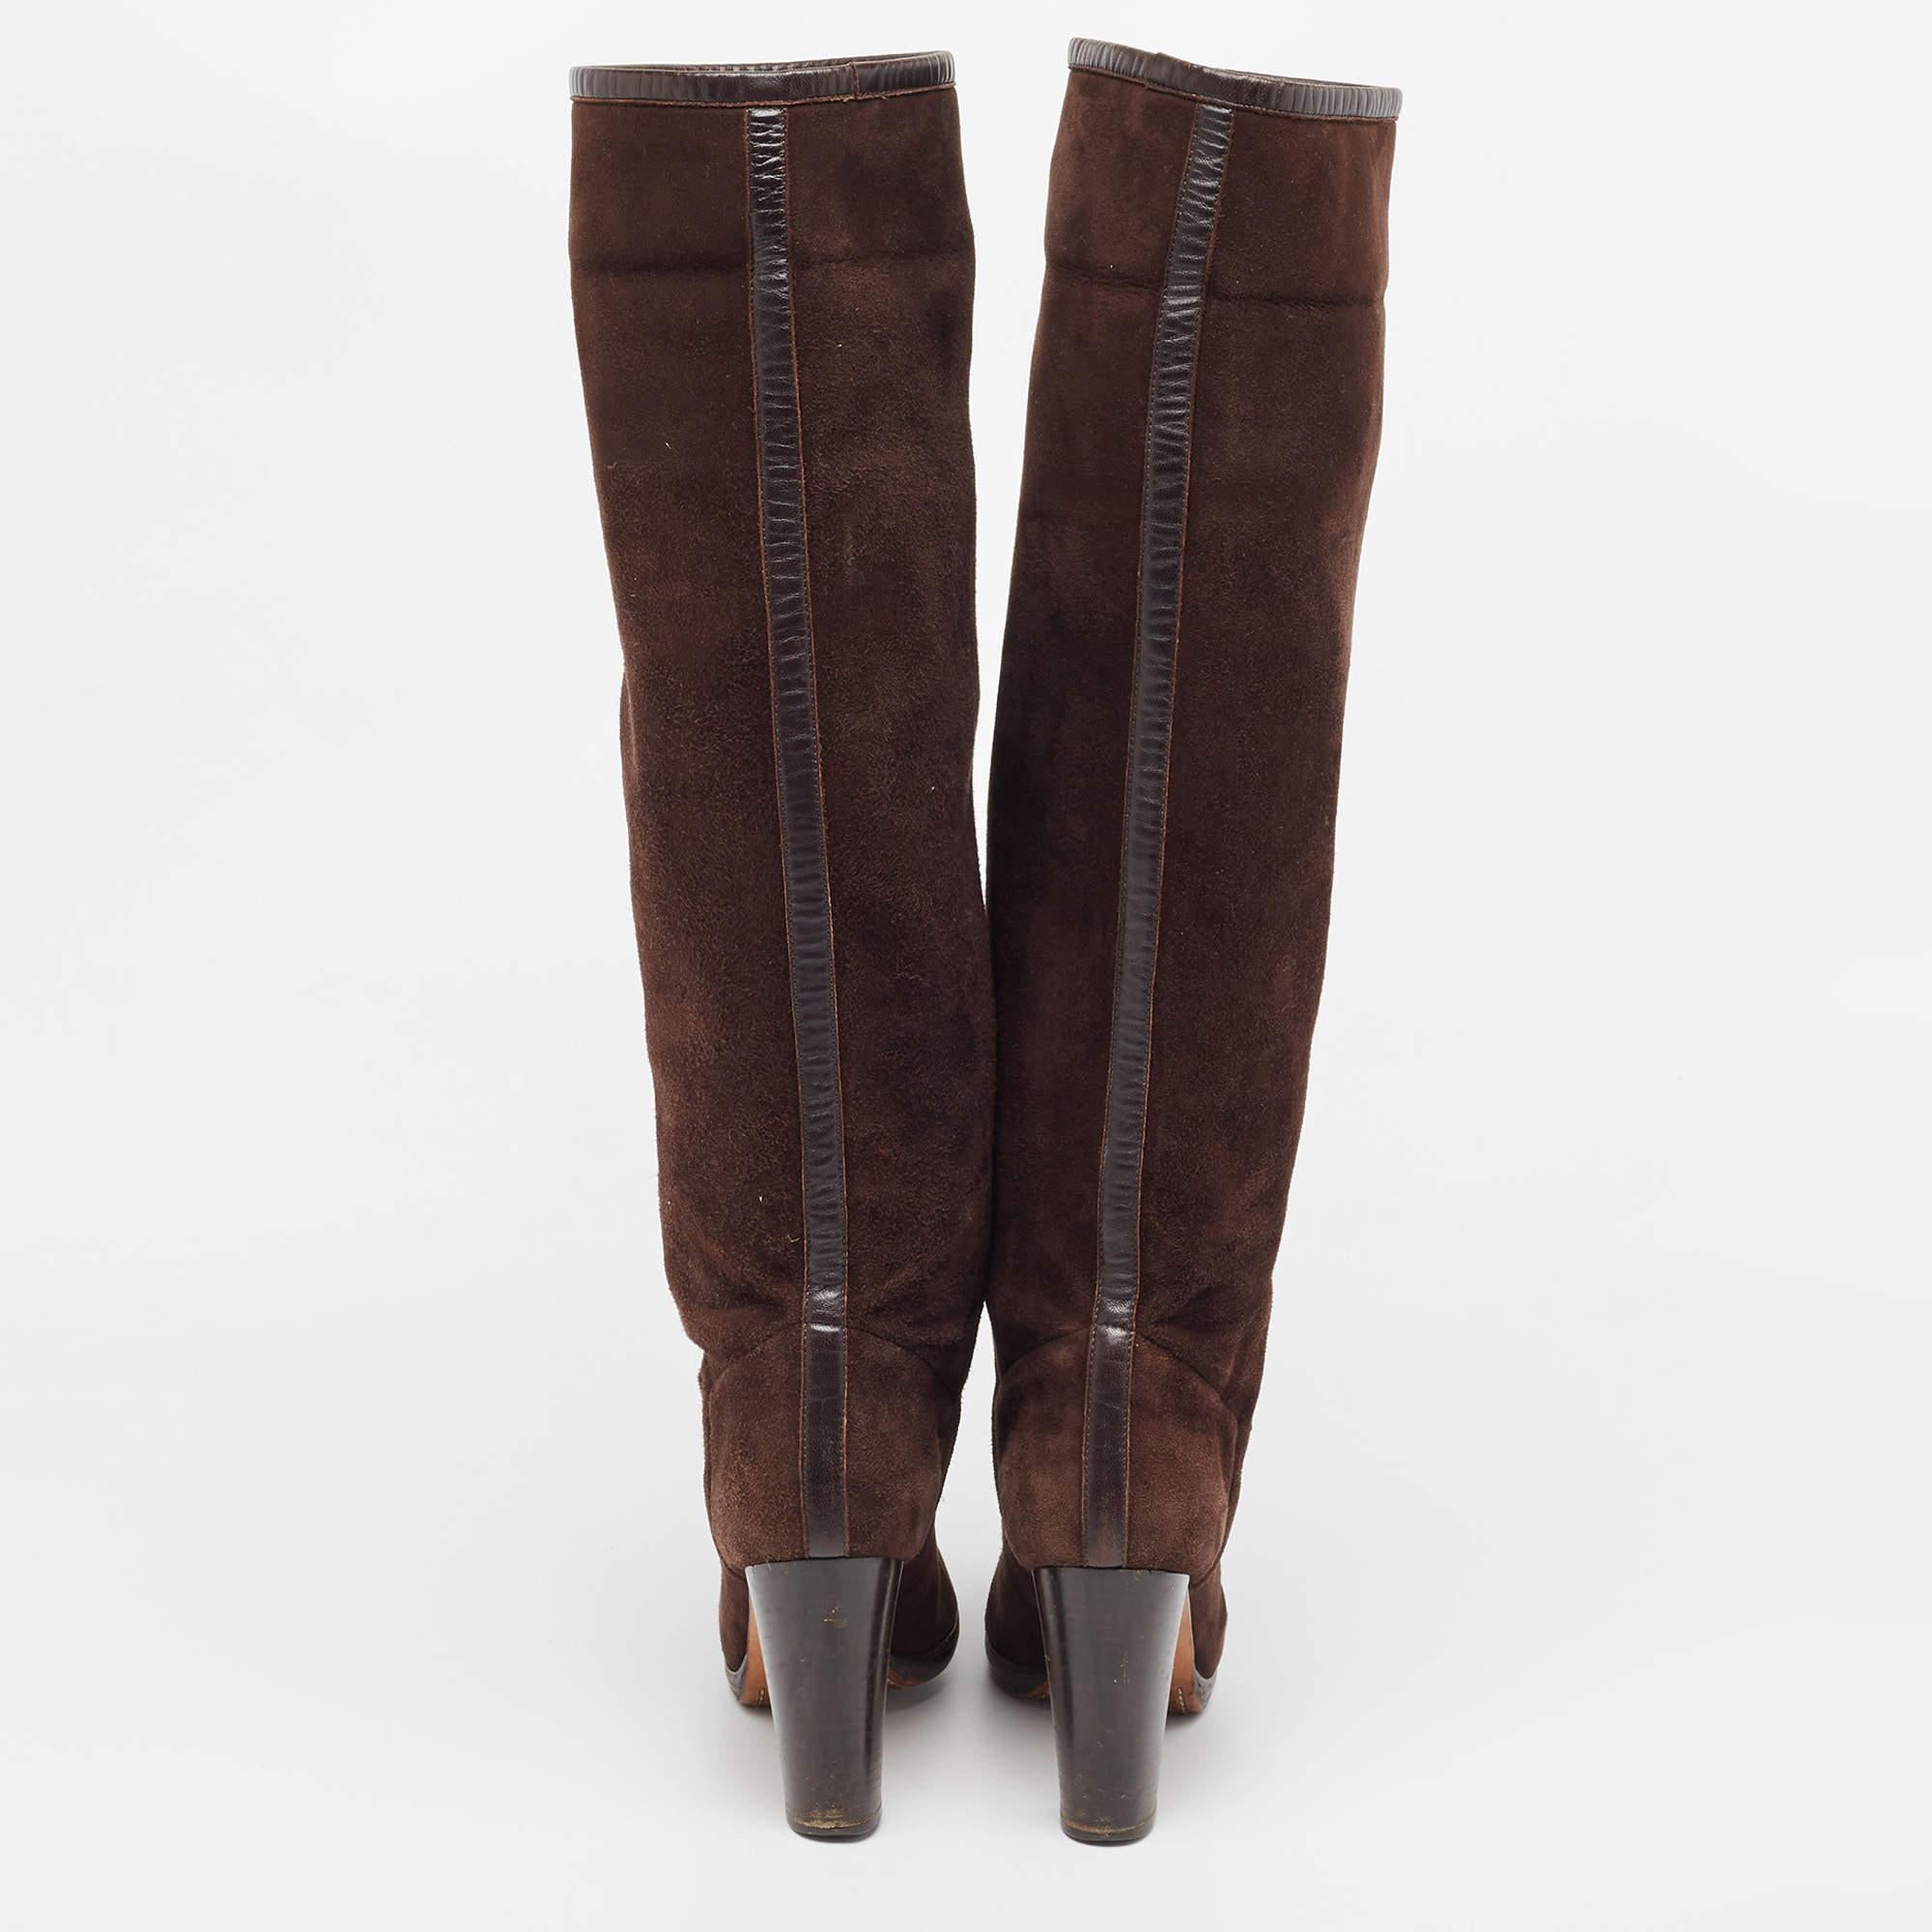 Loro Piana Brown Suede And Leather Knee Length Boots Size 39 1